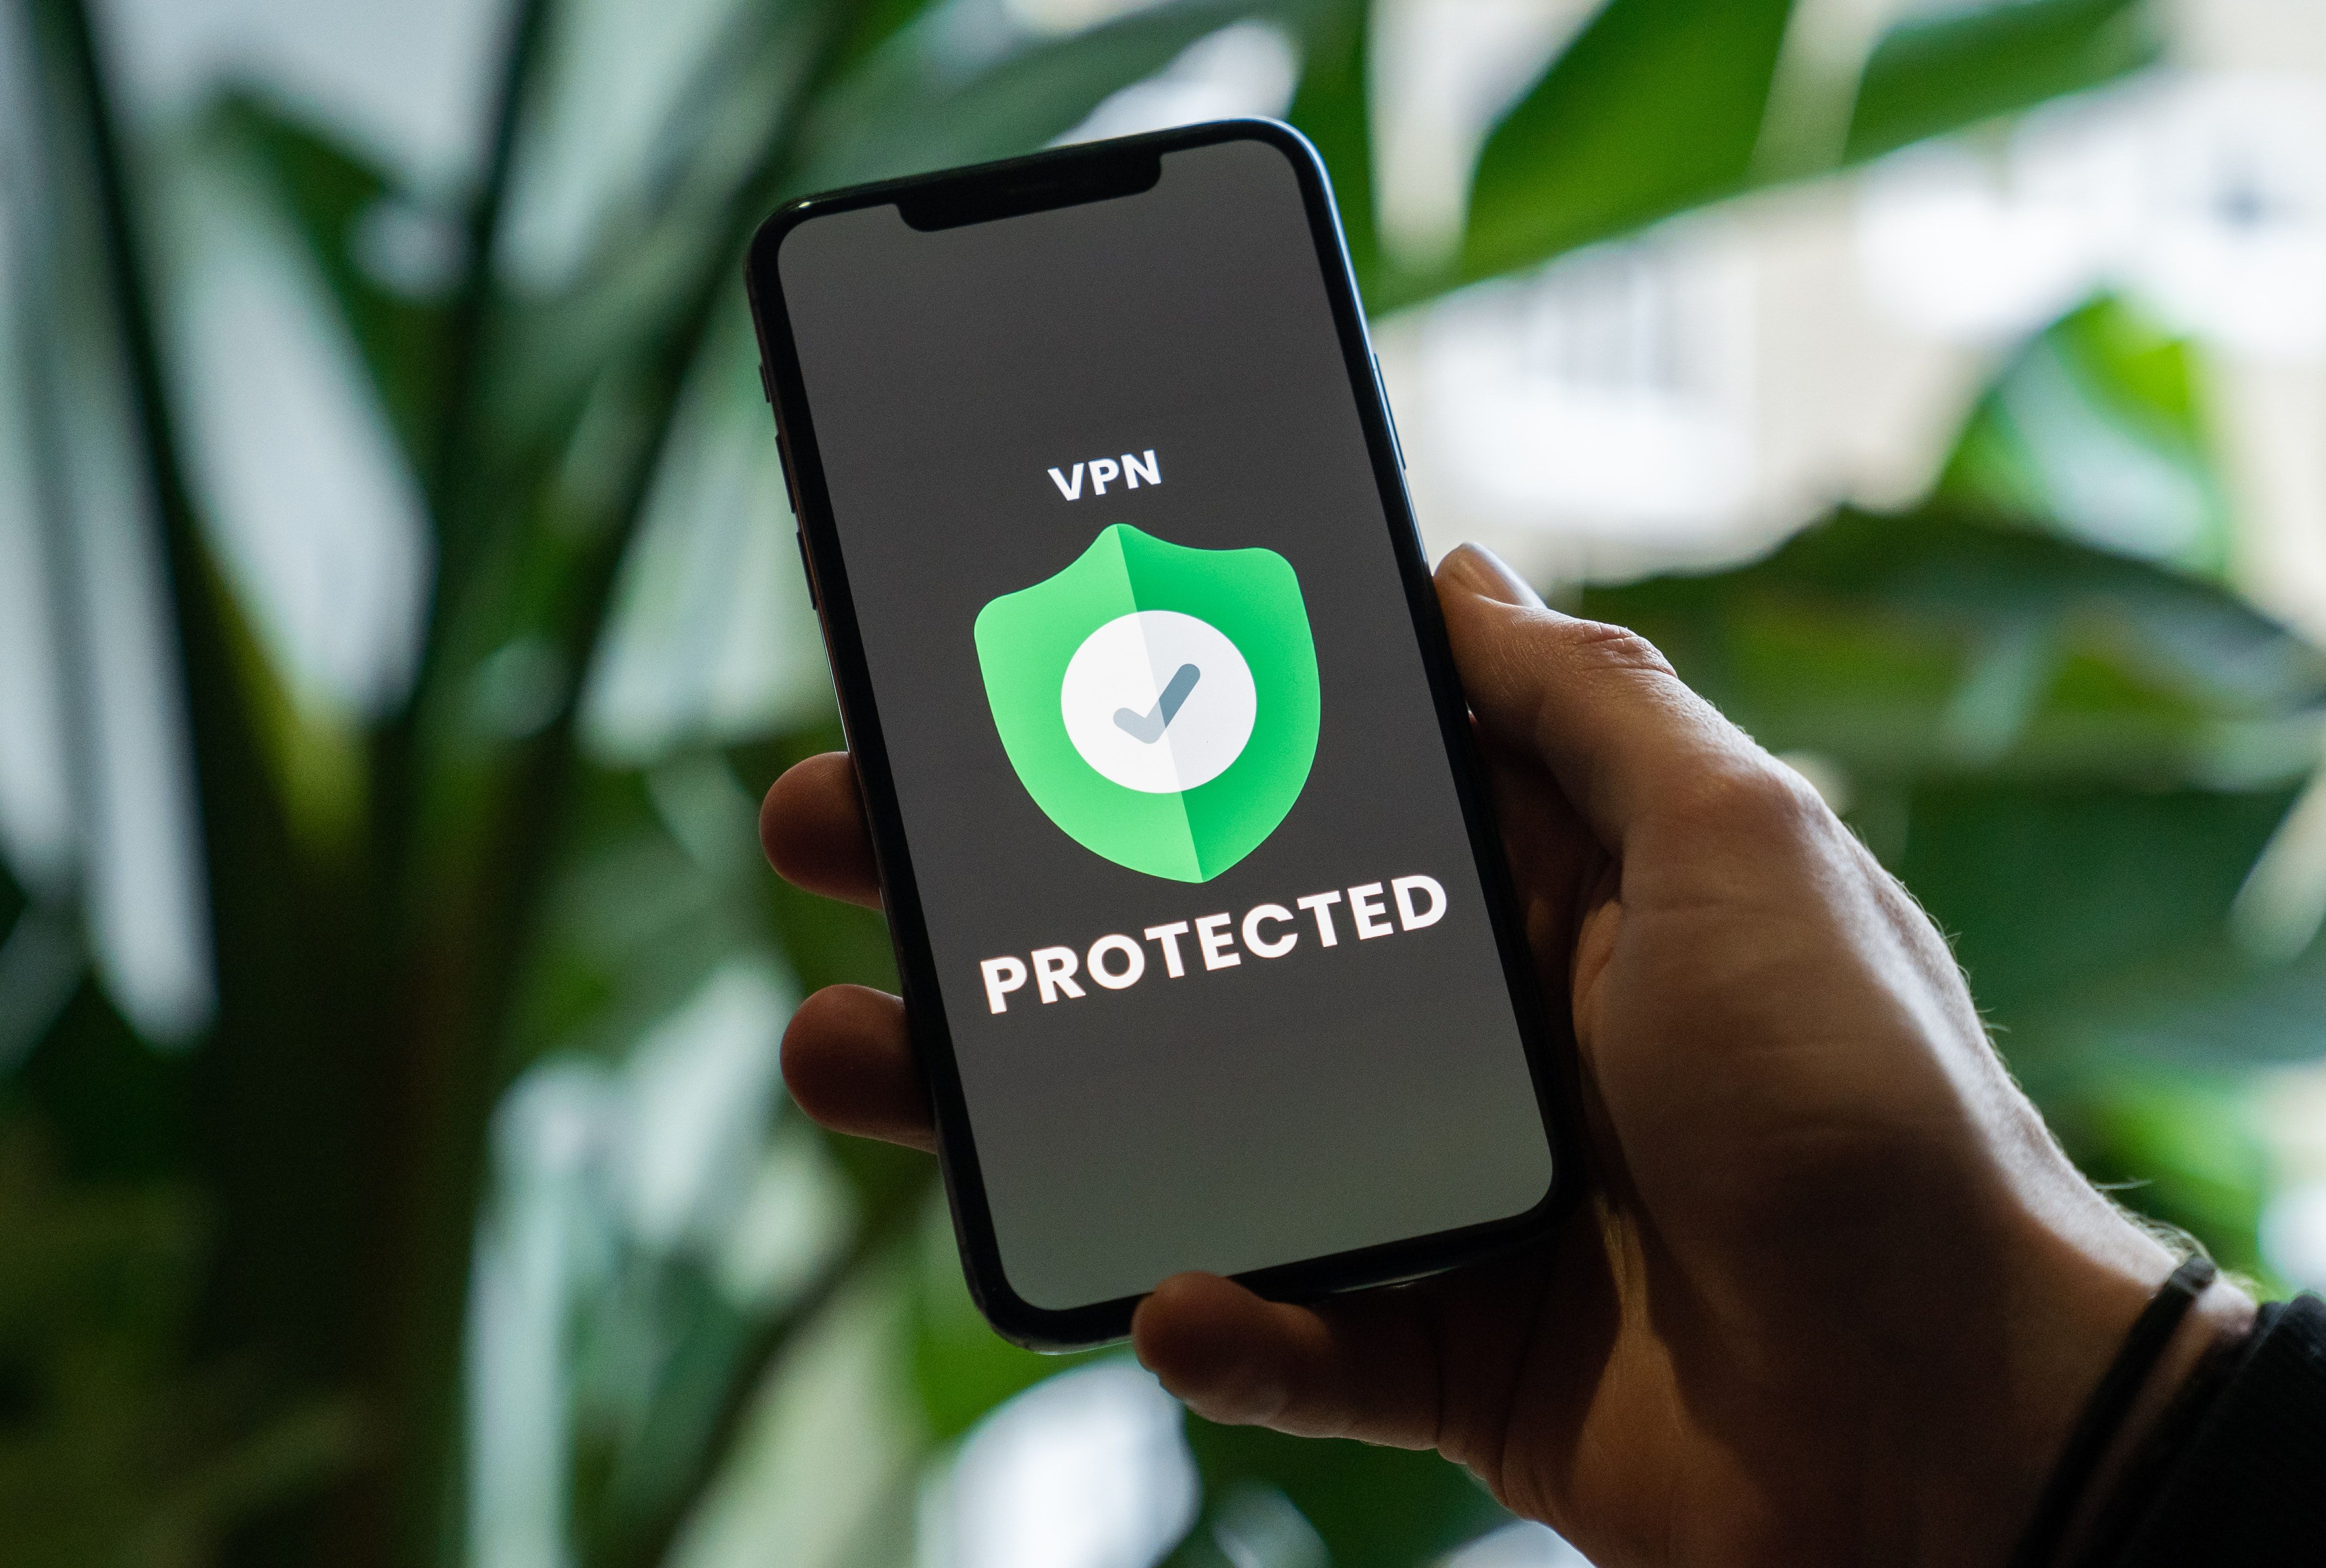 Man Holding Phone that says VPN Protected